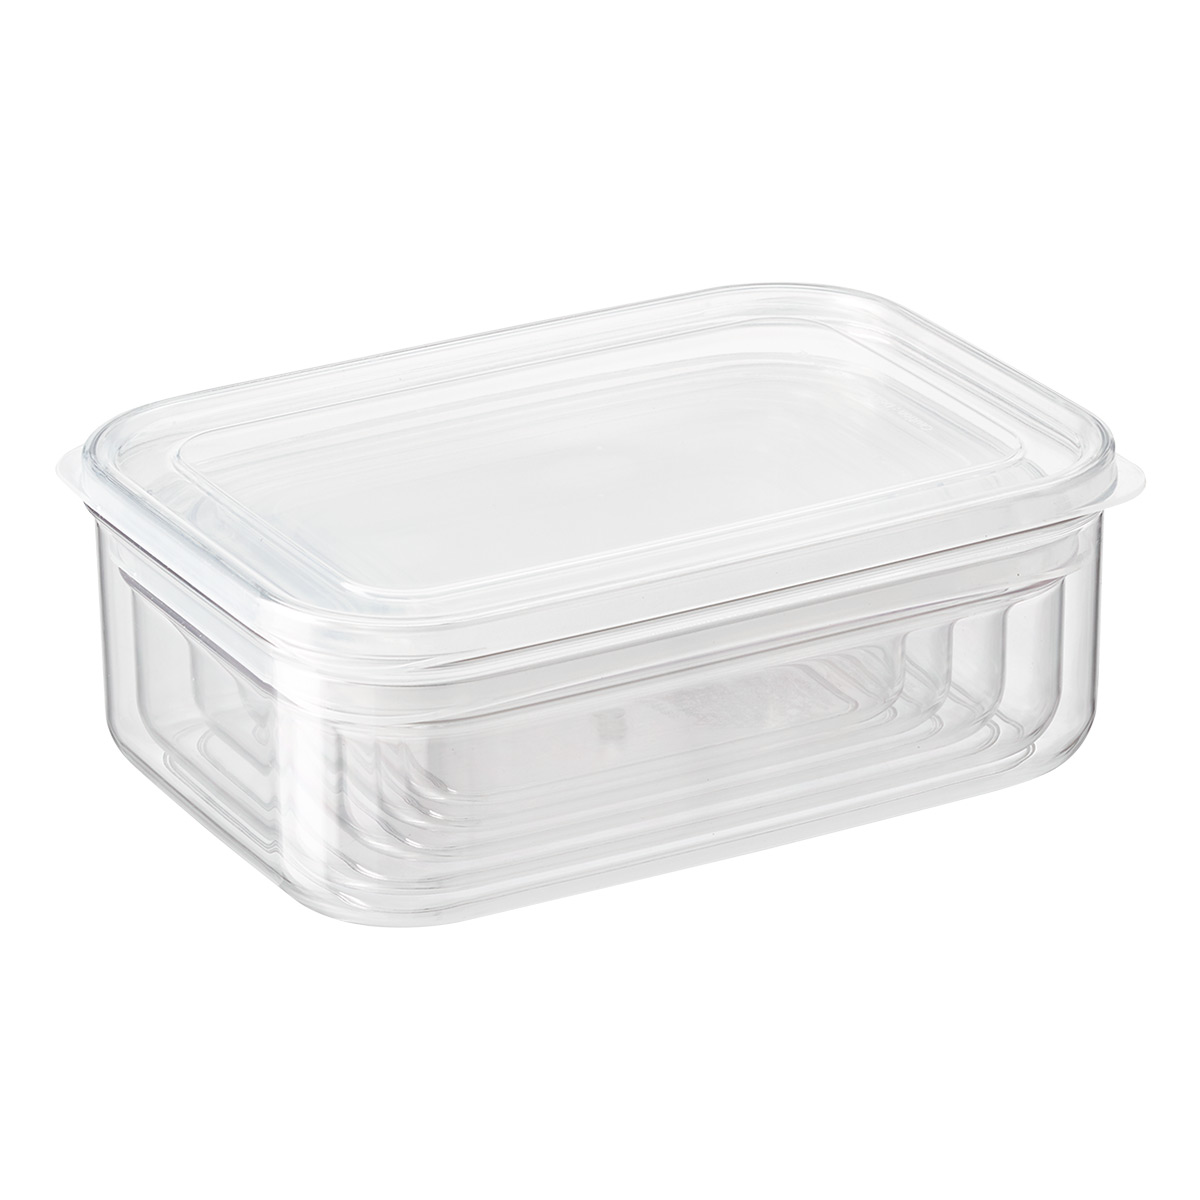 TUPPERWARE LARGE RECTANGLE LUNCH-IT DIVIDED DISH / CONTAINER MARGARITA –  Plastic Glass and Wax ~ PGW